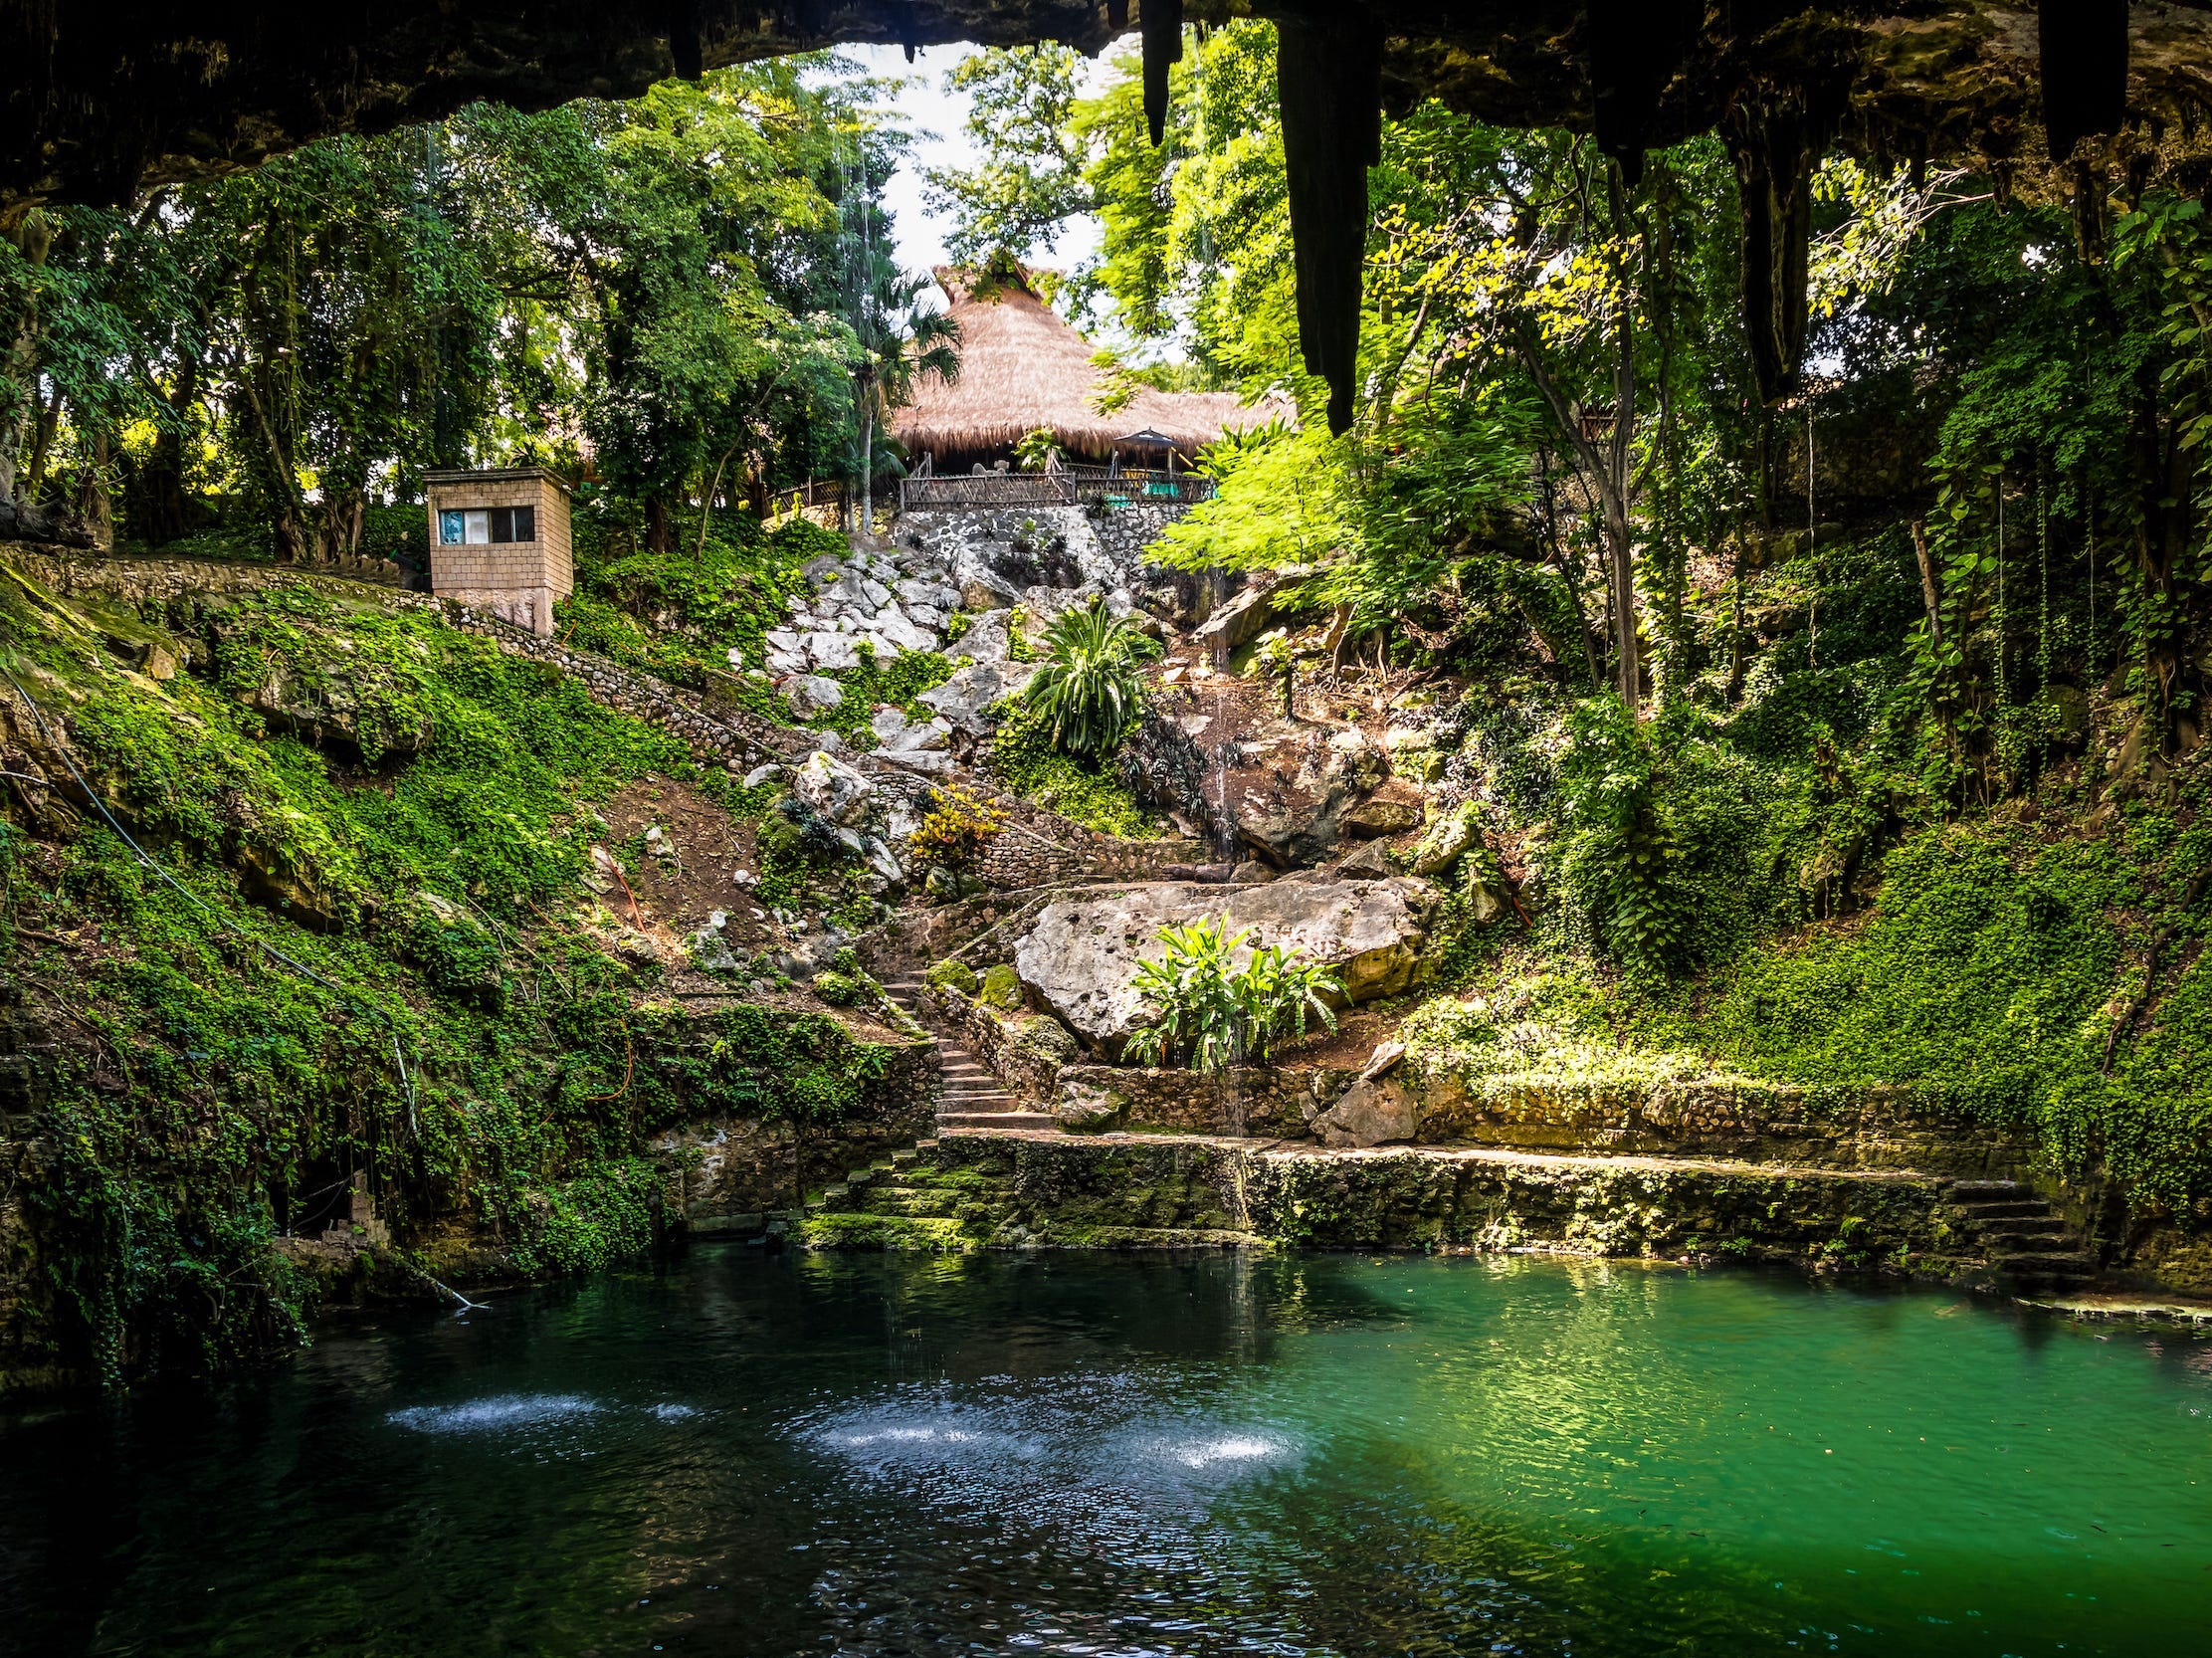 <p>Located in Mexico's Yucatán Peninsula, Valladolid has Mayan ruins, delicious food, and cenotes, which are natural spring swimming holes. </p><p>For around $300 as of May 2023, you can book three nights at <a href="https://www.mesondelmarques.com/" rel="nofollow noopener sponsored">Hotel Mesón del Marqués</a>, with breakfast included, according to <a href="https://affiliate.insider.com?h=80e0f6ea73a82a05066c1c48e9d8b9ac79d9fda0d76719ed11da8cdfdb3ed488&platform=msn_reviews&postID=642ade21ba755654617ced15&site=in&u=https%3A%2F%2Fwww.booking.com%2Fhotel%2Fmx%2Fmesa3n-del-marqua-c-s.html%3Faid%3D356980%26label%3Dgog235jc-1DCAsooAFCFW1lc2Ezbi1kZWwtbWFycXVhLWMtc0gzWANoiQKIAQGYATG4AQfIAQzYAQPoAQH4AQOIAgGoAgO4As2Ak6EGwAIB0gIkMGRmOTc3MGMtMDMwNi00MTM5LWFiYWItYTIxNjMxOGE3NjU52AIE4AIB%26sid%3D7dd975a9648d3b5e67de867e595c4502%26all_sr_blocks%3D32972002_101870294_2_1_0%3Bcheckin%3D2023-04-12%3Bcheckout%3D2023-04-13%3Bdest_id%3D-1707433%3Bdest_type%3Dcity%3Bdist%3D0%3Bgroup_adults%3D2%3Bgroup_children%3D0%3Bhapos%3D1%3Bhighlighted_blocks%3D32972002_101870294_2_1_0%3Bhpos%3D1%3Bmatching_block_id%3D32972002_101870294_2_1_0%3Bno_rooms%3D1%3Breq_adults%3D2%3Breq_children%3D0%3Broom1%3DA%252CA%3Bsb_price_type%3Dtotal%3Bsr_order%3Dpopularity%3Bsr_pri_blocks%3D32972002_101870294_2_1_0__234298%3Bsrepoch%3D1680130148%3Bsrpvid%3Decbaa071d88e00d0%3Btype%3Dtotal%3Bucfs%3D1%26%23hotelTmpl&utm_source=msn_reviews" rel="nofollow noopener sponsored">Booking.com</a>, and access to the pool, jacuzzi, and sunbathing terrace. The hotel is in the heart of the city, within walking distance of sites like <a href="https://affiliate.insider.com?h=872e2e815b2d349659bb34e32a776252e4fbdc7210ce75446caa959f891b9e71&platform=msn_reviews&postID=642ade21ba755654617ced15&site=in&u=https%3A%2F%2Fwww.tripadvisor.com%2FAttraction_Review-g499453-d1129046-Reviews-Convent_de_San_Bernardino_de_Siena-Valladolid_Yucatan_Peninsula.html&utm_source=msn_reviews" rel="noopener nofollow sponsored nofollow sponsored">Convent de San Bernardino de Siena</a>, a Franciscan colonial building, and <a href="https://affiliate.insider.com?h=01f531fb6d9cbffd7c39fe89c3c76d4fc7c905d959617ea1ddb021aaa05ba0c3&platform=msn_reviews&postID=642ade21ba755654617ced15&site=in&u=https%3A%2F%2Fwww.tripadvisor.com%2FAttraction_Review-g499453-d10253919-Reviews-Xkopek_Parque_Apicola-Valladolid_Yucatan_Peninsula.html&utm_source=msn_reviews" rel="noopener nofollow sponsored nofollow sponsored">Xkopek Parque Apicola</a>, a beekeeping farm and park with daily tours.</p><p>Dining doesn't have to be expensive either. Valladolid has many restaurants where meals cost as little as $10 per person, like <a href="https://www.facebook.com/ahalrestaurante/" rel="noopener nofollow sponsored">Ahal</a>, which serves Mexican food in a cozy space with a courtyard. For a splurge, <a href="https://www.ixcatik.mx/" rel="noopener nofollow sponsored">Ixcatic</a> serves authentic farm-to-table dinners based on Mayan cuisine. Expect to spend about $80 for two diners for dishes like <a href="https://www.seriouseats.com/sopa-de-lima-yucatan-mexican-lime-soup-recipe" rel="nofollow noopener sponsored nofollow sponsored">sopa de lima</a>, a lime and chicken soup, and <a href="https://www.seriouseats.com/cochinita-pibil-yucatan-barbecue-mexican-smoked-pork-recipe" rel="nofollow noopener sponsored">cochinita píibil</a>, pork seasoned with achiote, wrapped in a banana leaf, and smoked.</p><p>Among the many cenotes in Valladolid, a must-visit is <a href="https://zaziltunich.com/reservaciones/inframundo-maya/" rel="noopener nofollow sponsored">Cenote Zazil Tunich,</a> a stunning underwater sinkhole with crystal-clear water formed centuries ago, which you can swim in and tour for 350 Mexican pesos, or about $20.</p><p>After that, spend <a href="https://affiliate.insider.com?h=e52e4083d02959fe8cde615c379a47496e6f4acc0904deecfc398a174d861fab&platform=msn_reviews&postID=642ade21ba755654617ced15&site=in&u=https%3A%2F%2Fwww.tripadvisor.com%2FAttractionProductReview-g150807-d12649472-Chichen_Itza_Tour_Buffet_Lunch_Cenote_Tequila_tasting_Valladolid-Cancun_Yucatan_Pe.html&utm_source=msn_reviews" rel="nofollow noopener sponsored">a full-day tour with a local guide</a> that includes visiting <a href="https://www.chichenitza.com/" rel="nofollow noopener sponsored nofollow sponsored">Chichén Itzá,</a> an archaeological site that was once a Mayan city, swimming in Cenote Chichikan, and a tequila tasting. The tour is about $48 per person, and entry to <a href="https://www.chichenitza.com/" rel="nofollow noopener sponsored nofollow sponsored">Chichén Itzá</a> costs another $34.</p>